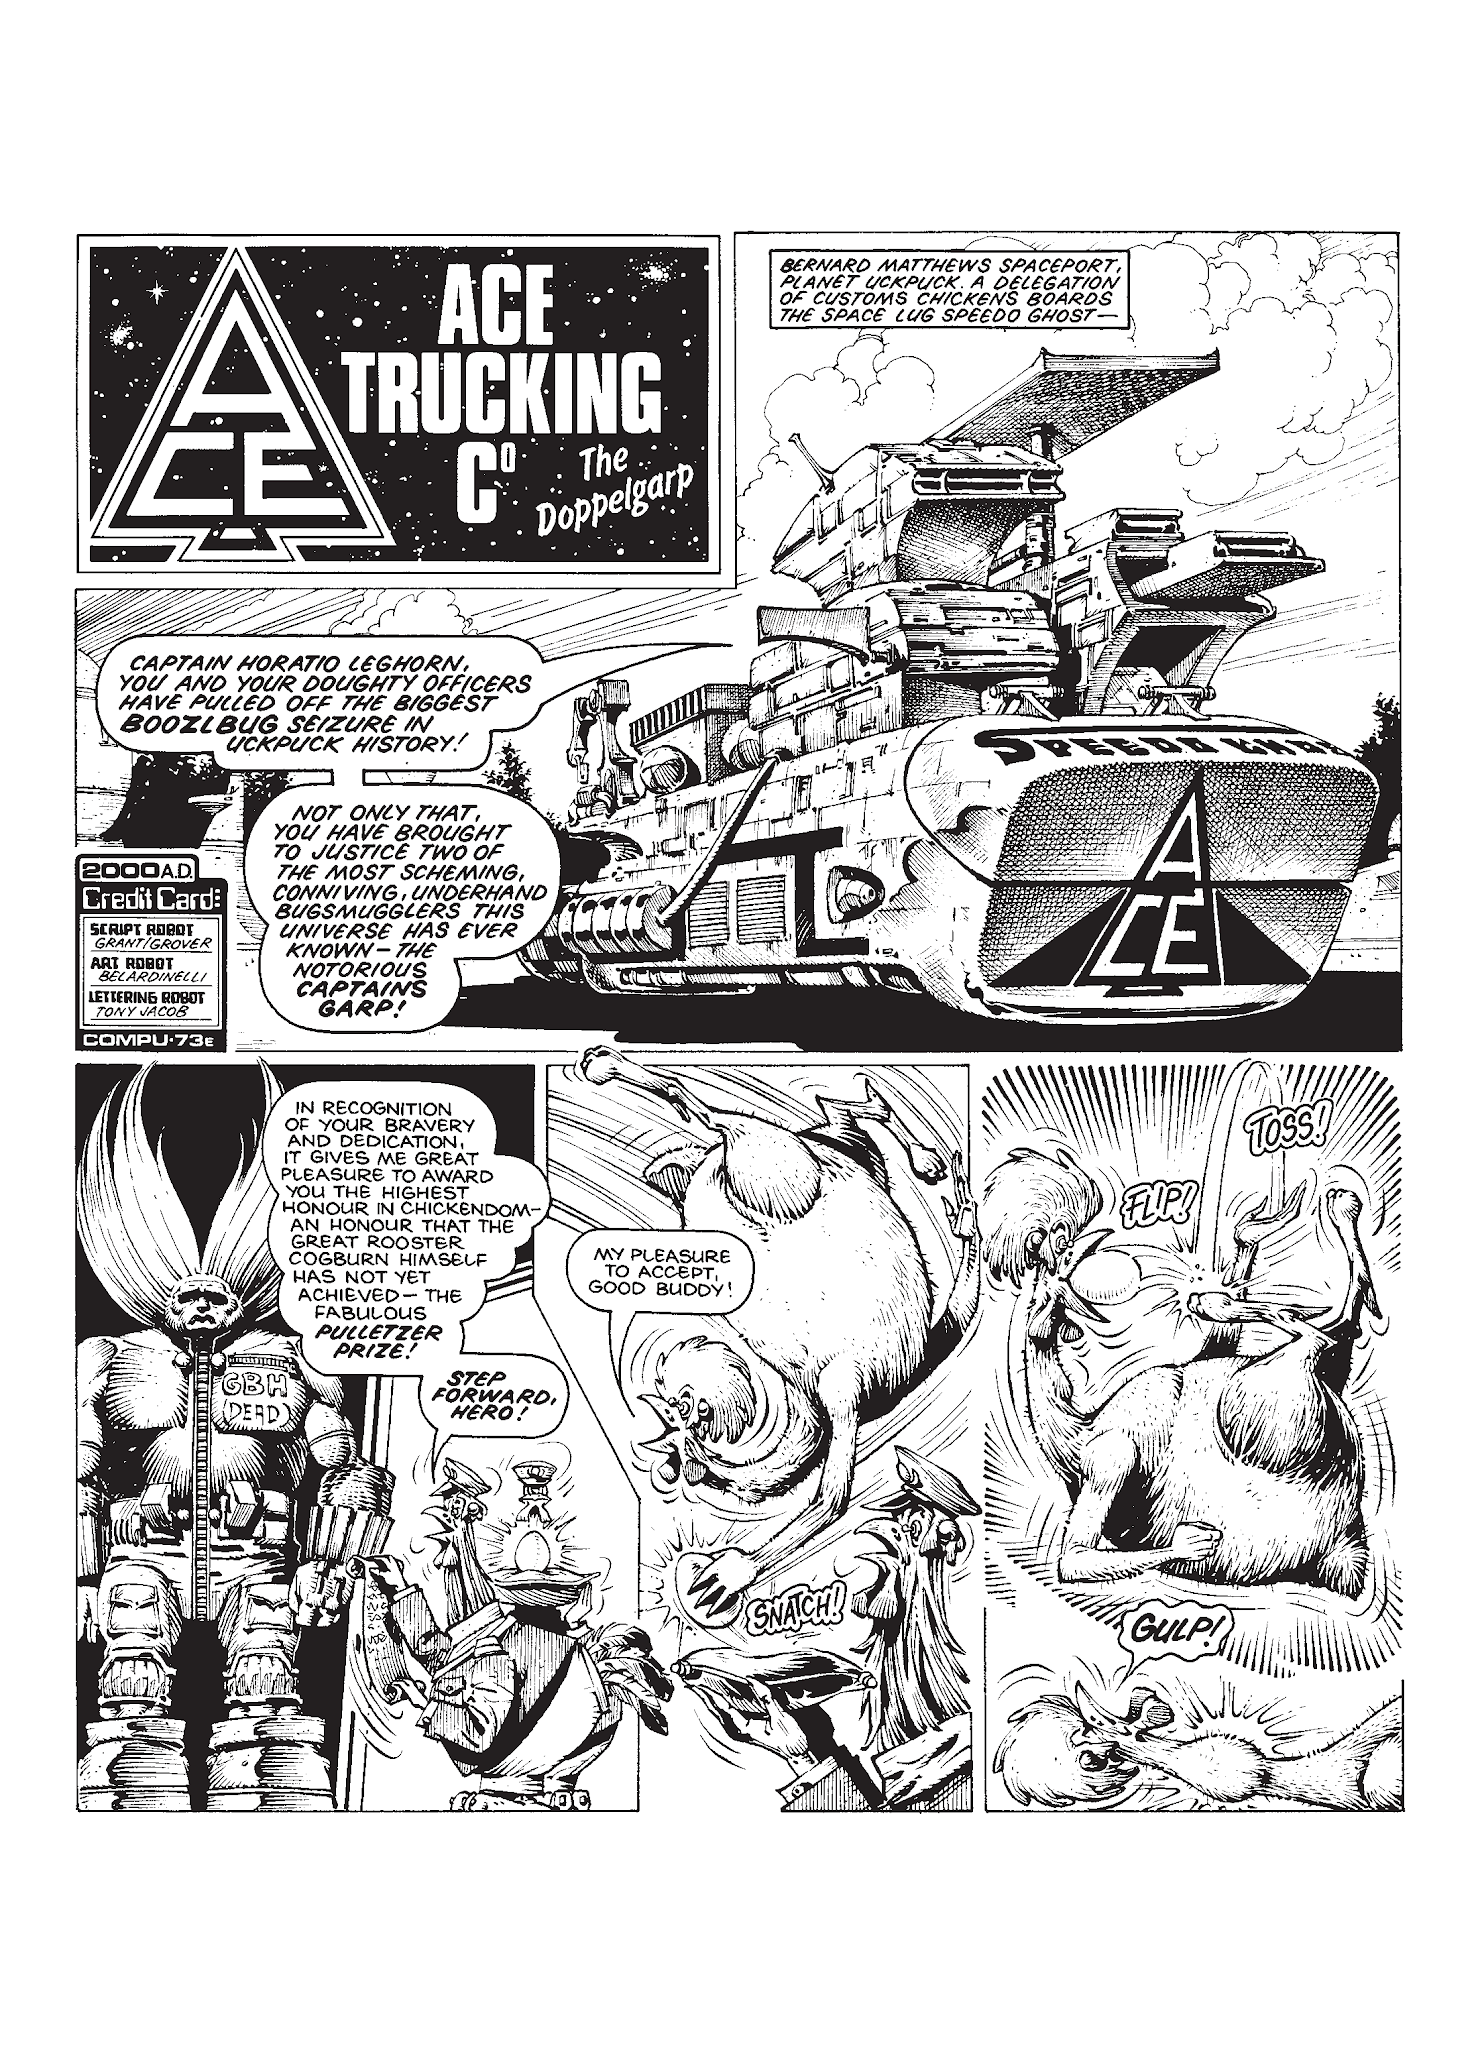 Read online The Complete Ace Trucking Co. comic -  Issue # TPB 2 - 205